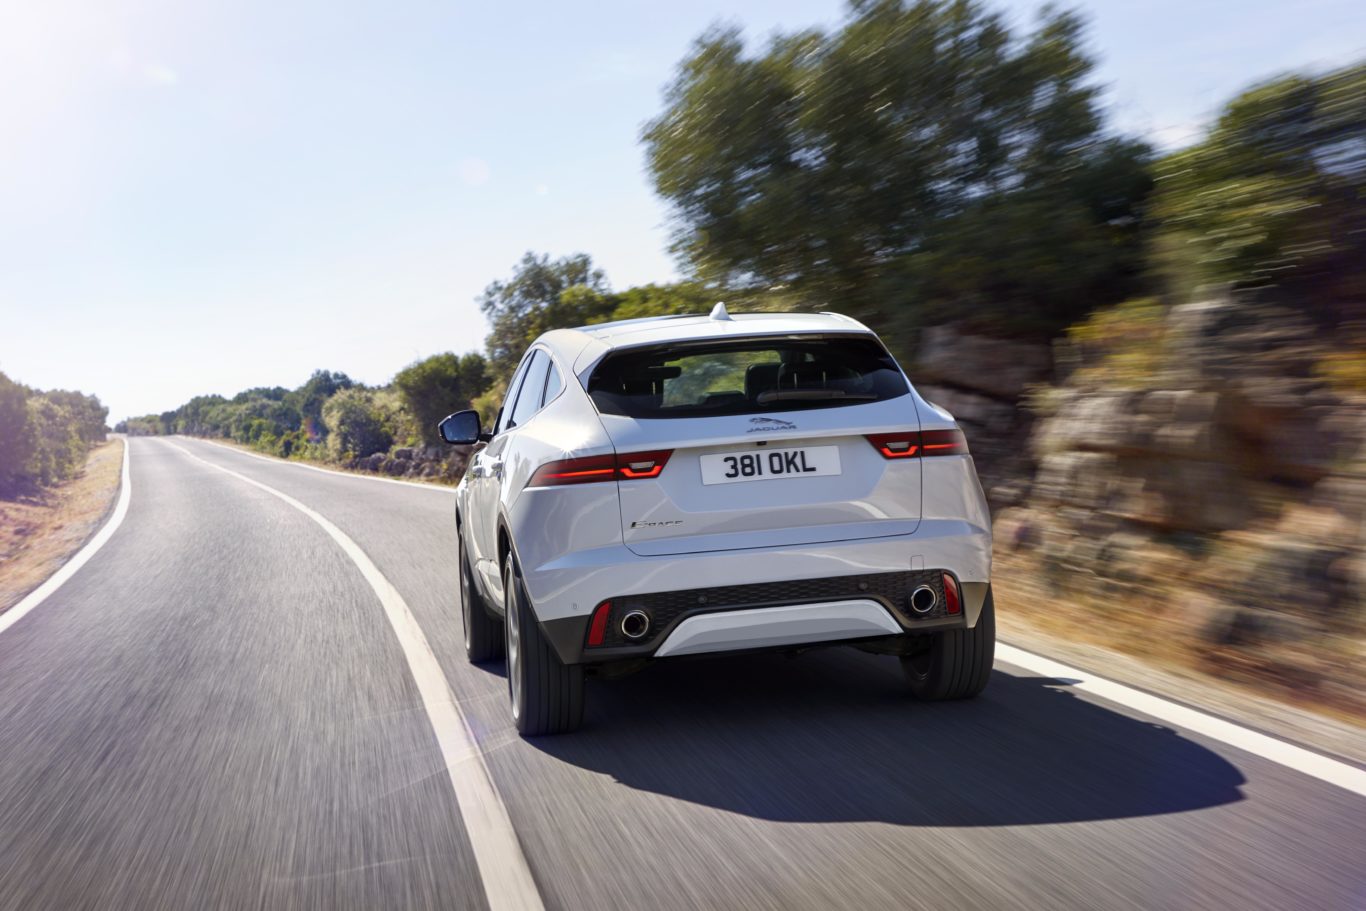 The rear-end styling of the E-Pace has been designed to reflect that of the F-Type sports car